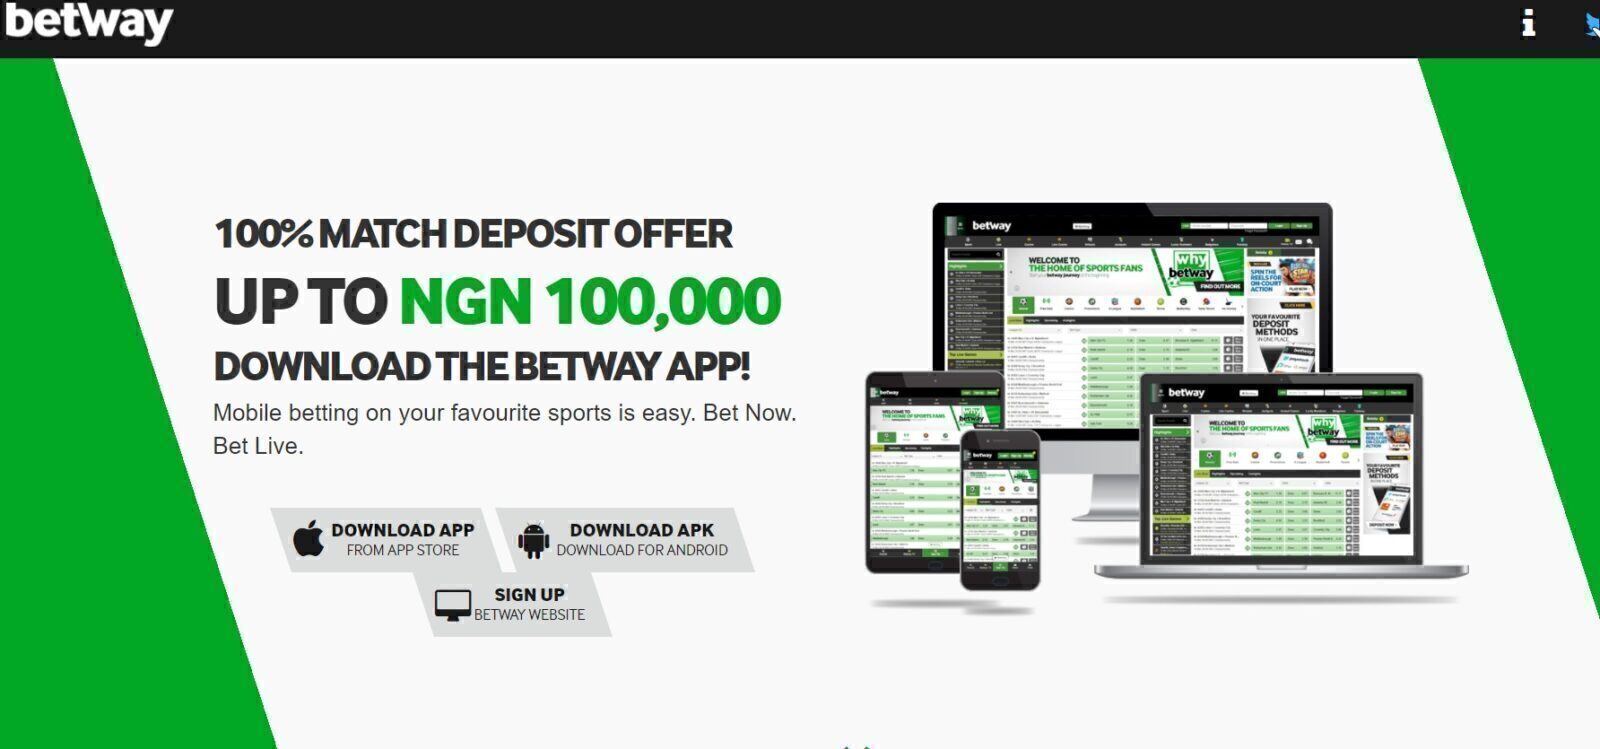 No matter what kind of device you have you can find the Betway